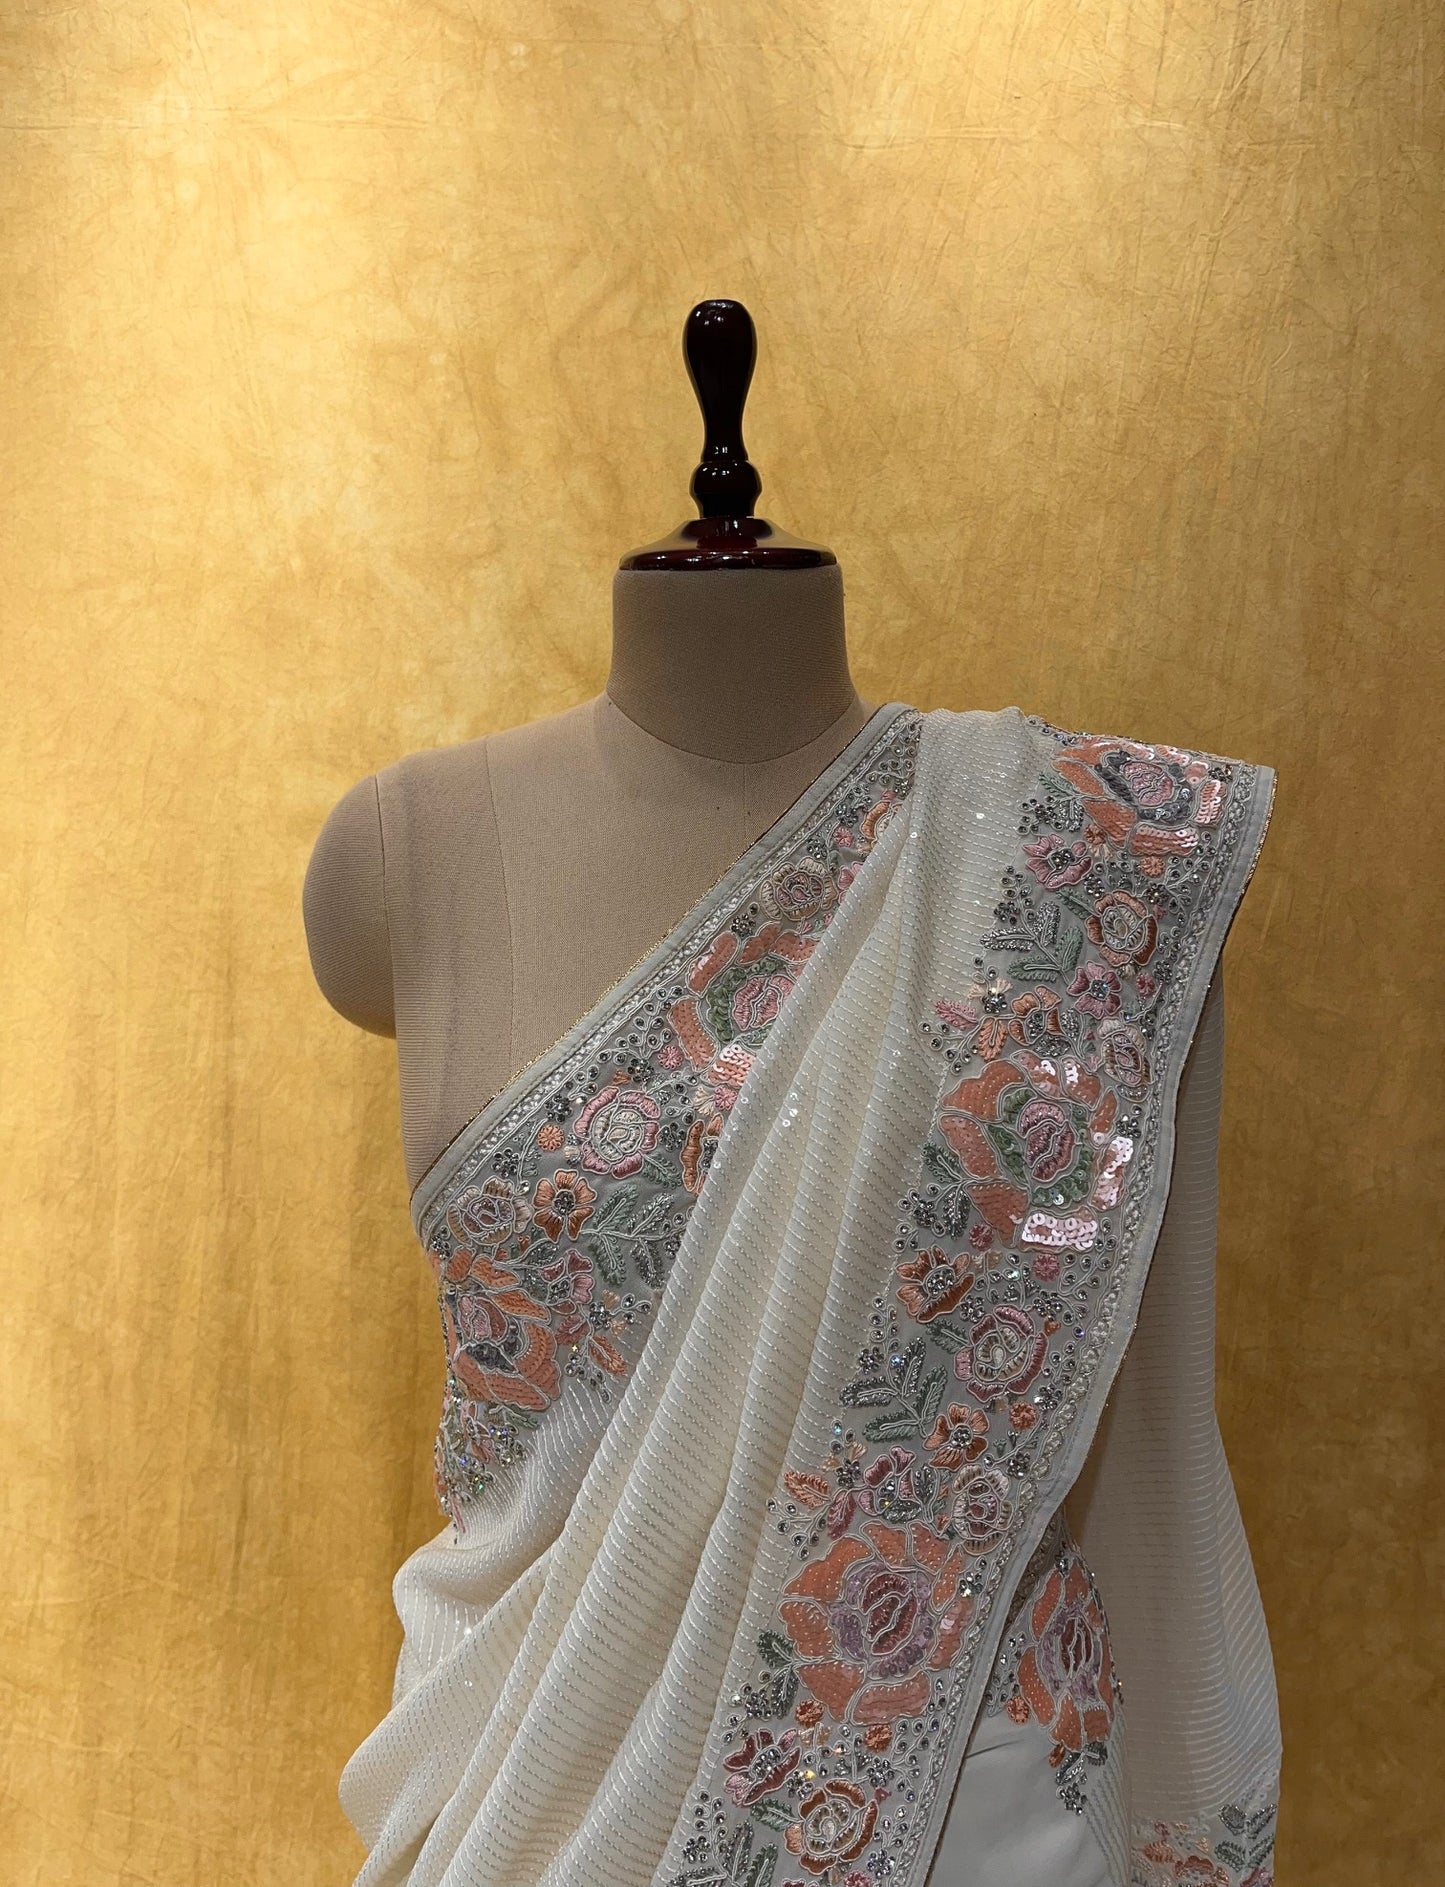 OFF WHITE COLOUR PURE GEORGETTE SAREE SEQUINS SAREE EMBELLISHED WITH RESHAM & STONE WORK